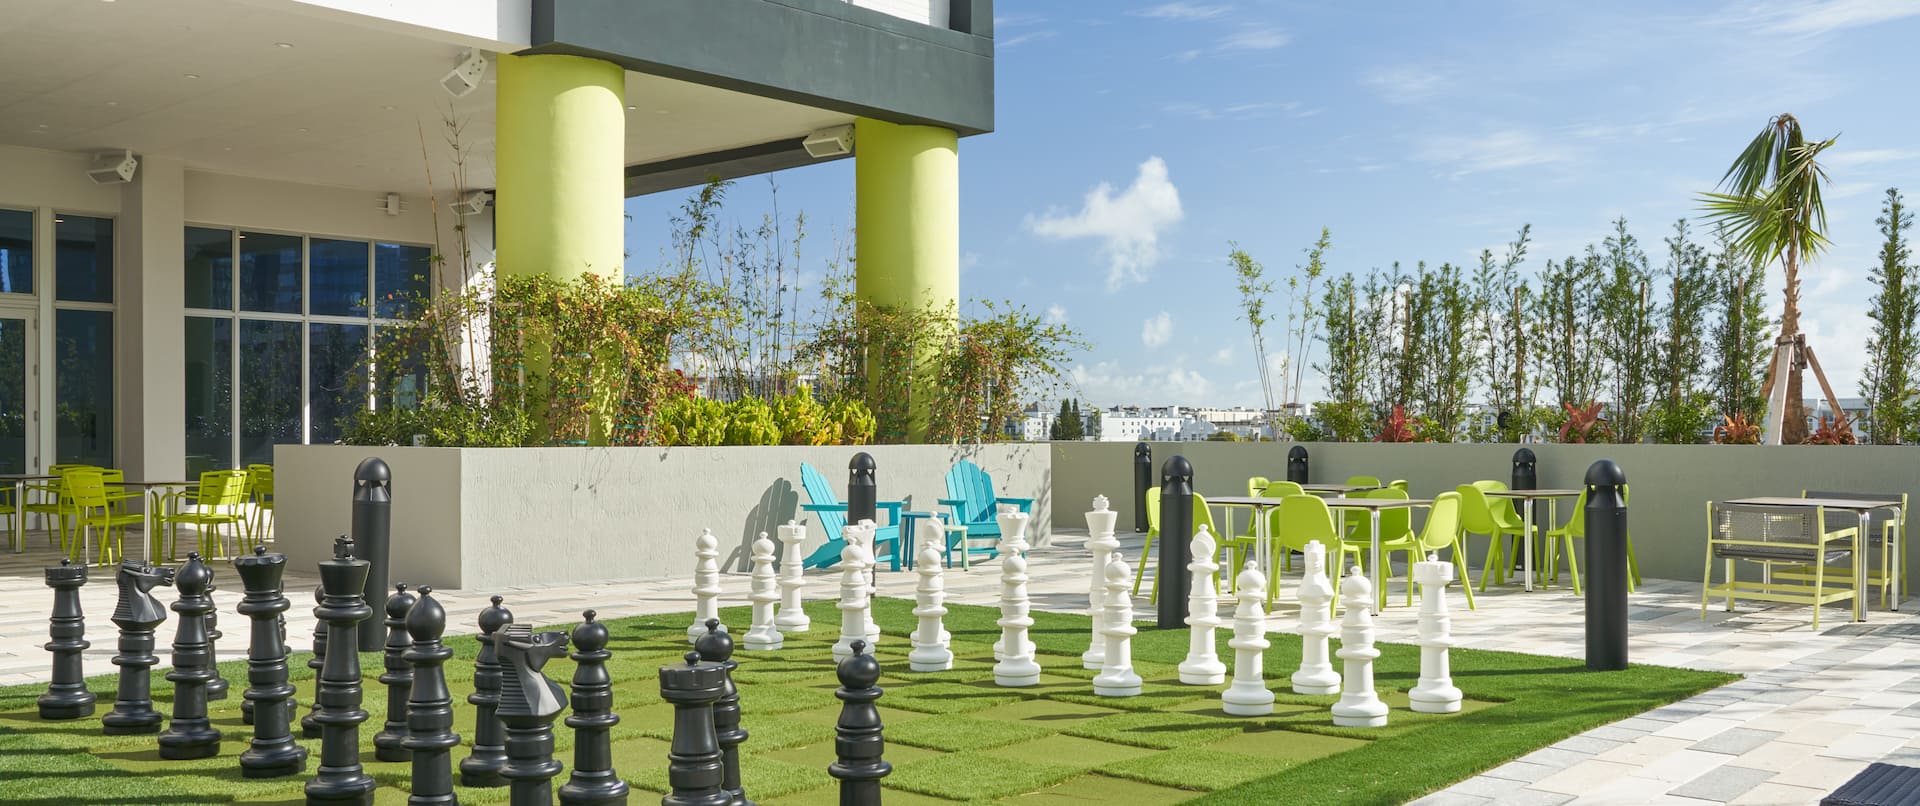 outdoor patio, large chess game